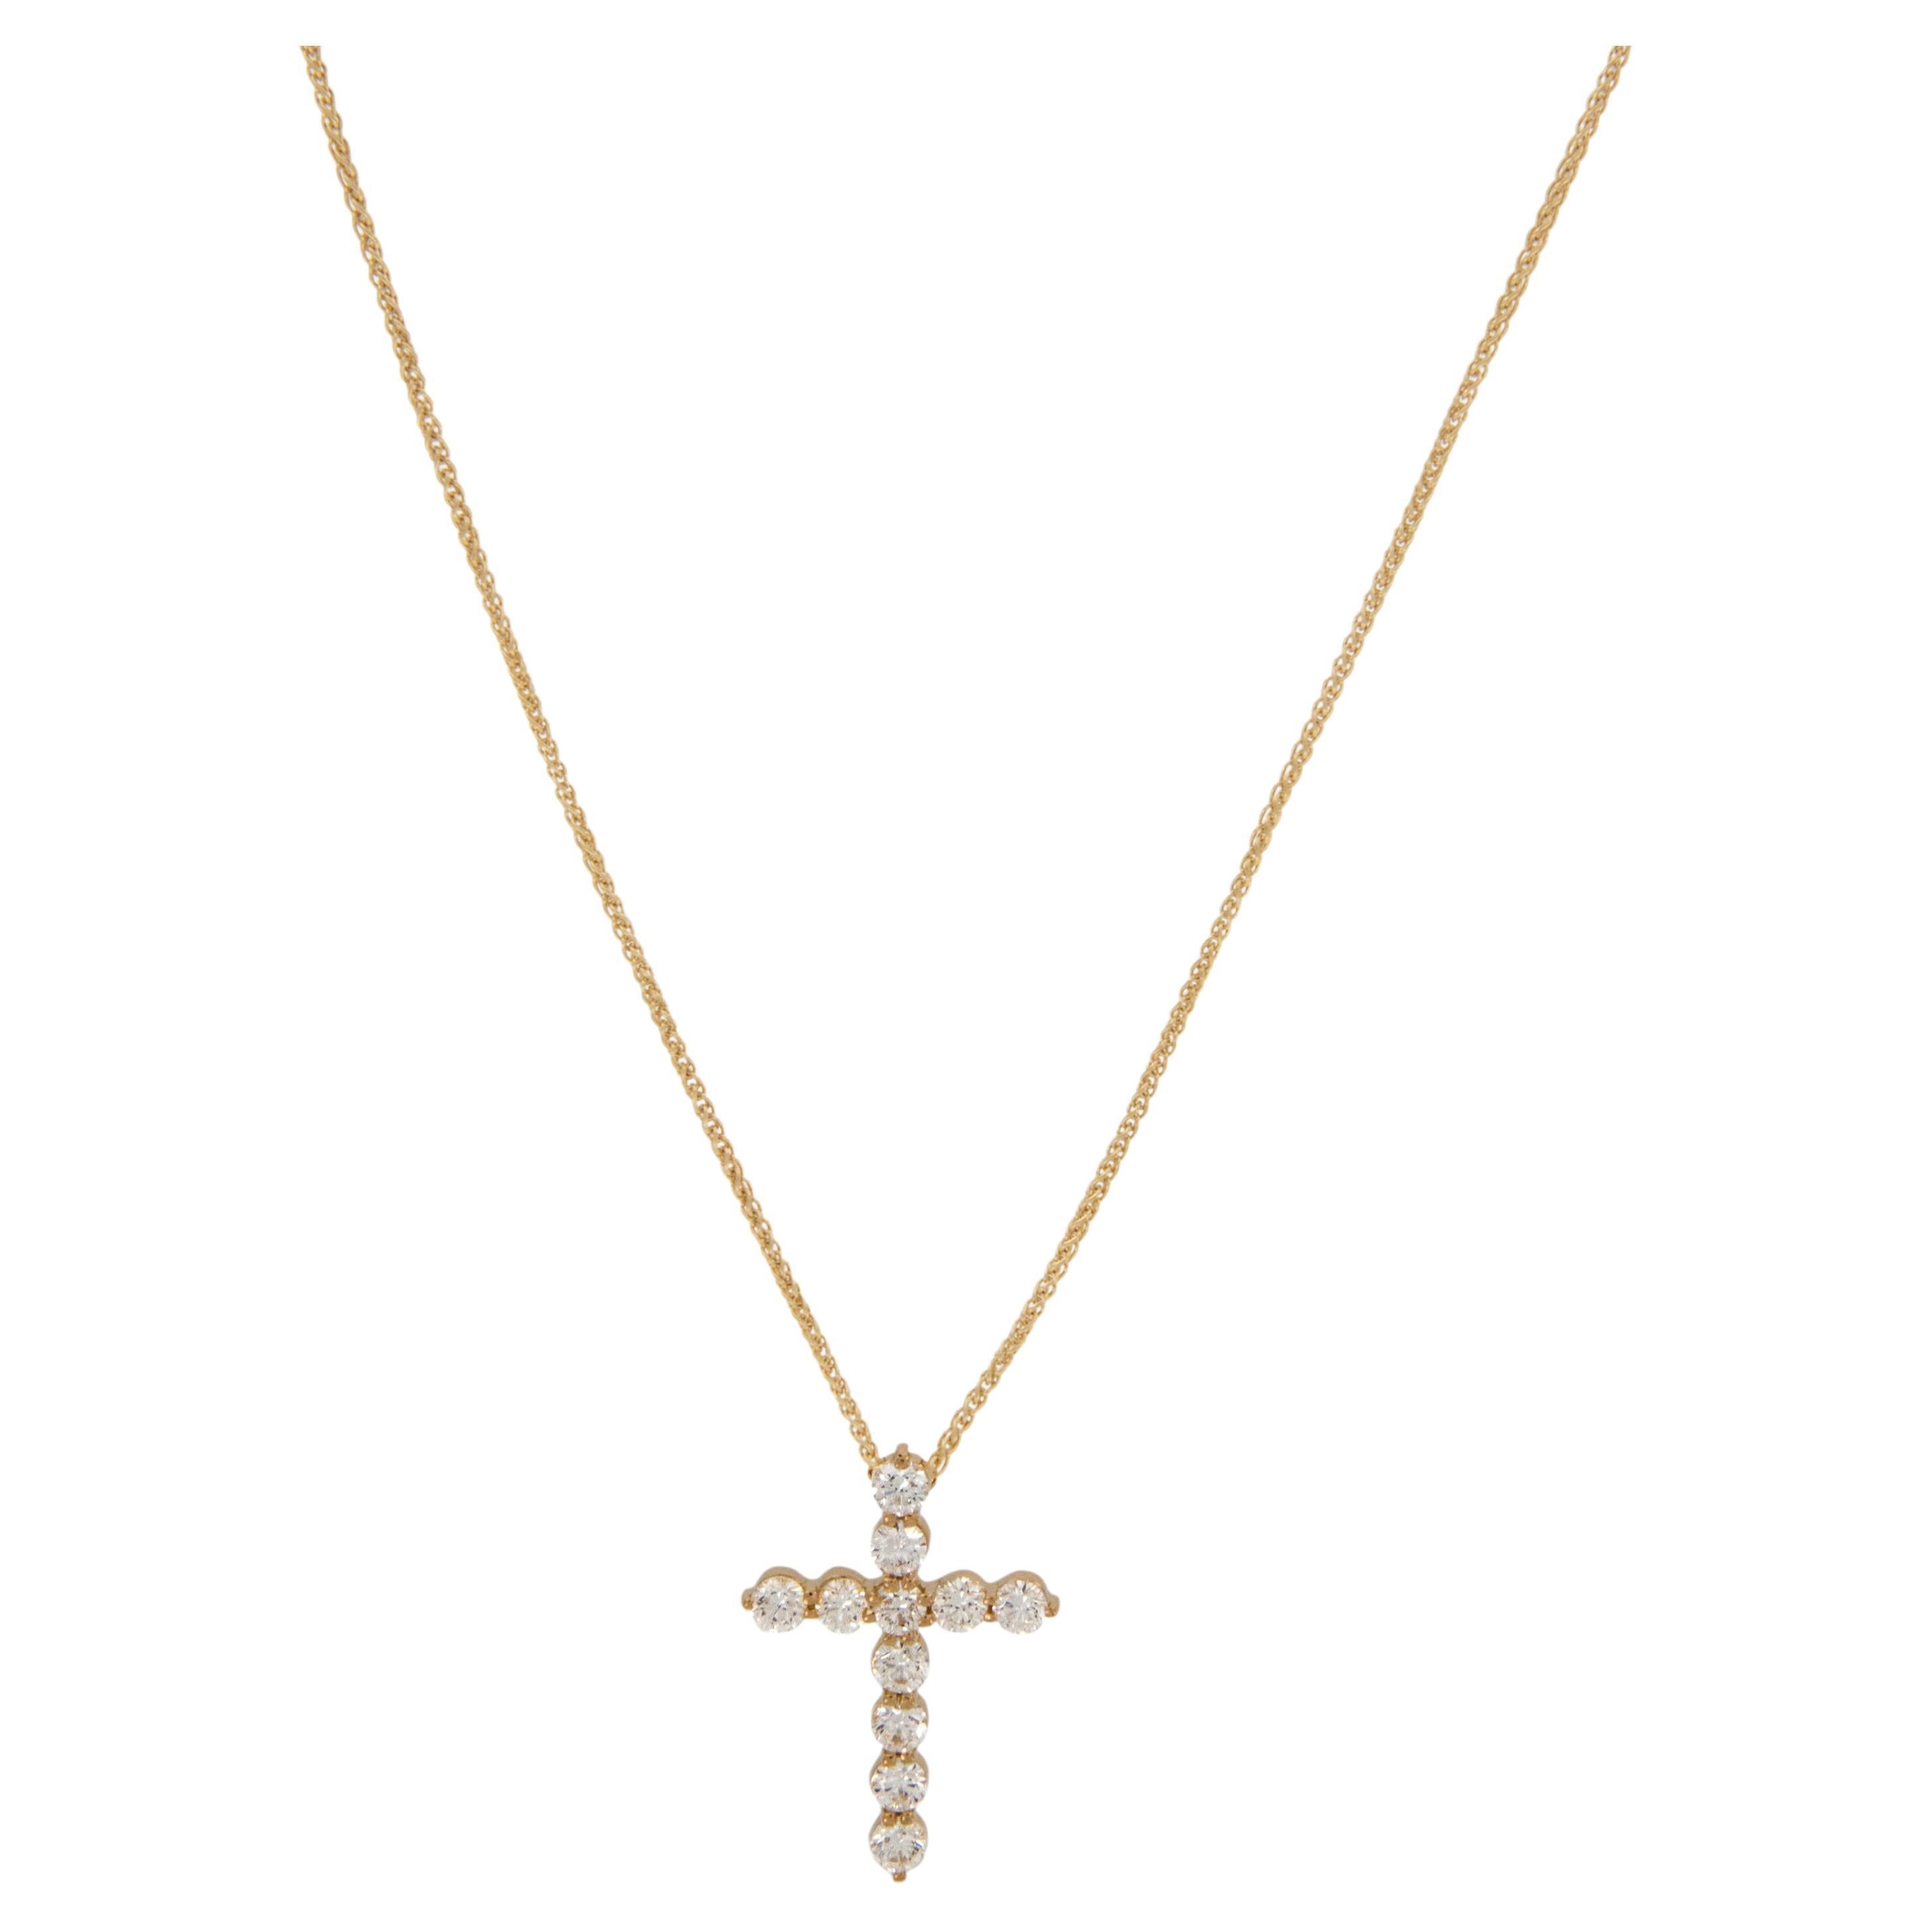 Made from rich 18 karat yellow gold and adorned with fine ( VS, G-H) quality diamonds = 0.82 Cttw. this elegant cross is the perfect addition to your wardrobe. Suspended on a sturdy 18